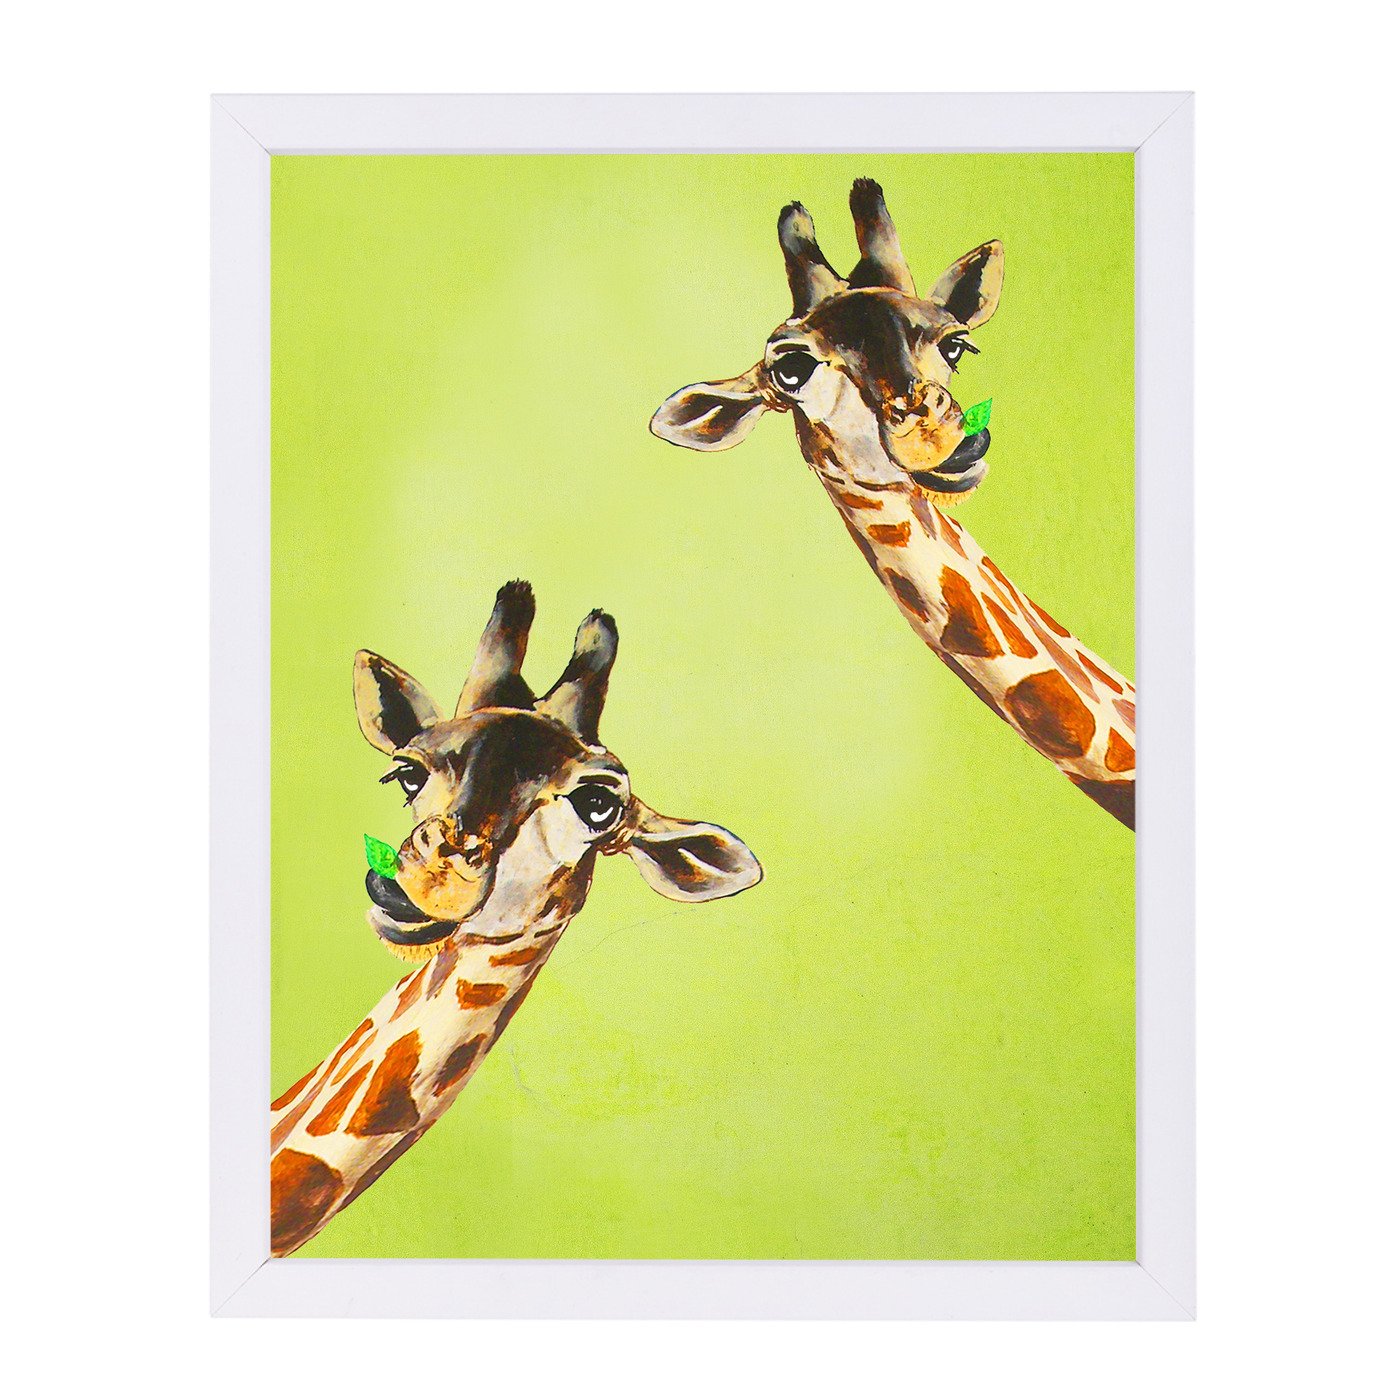 Giraffes Looking To You By Coco De Paris - Framed Print - Americanflat